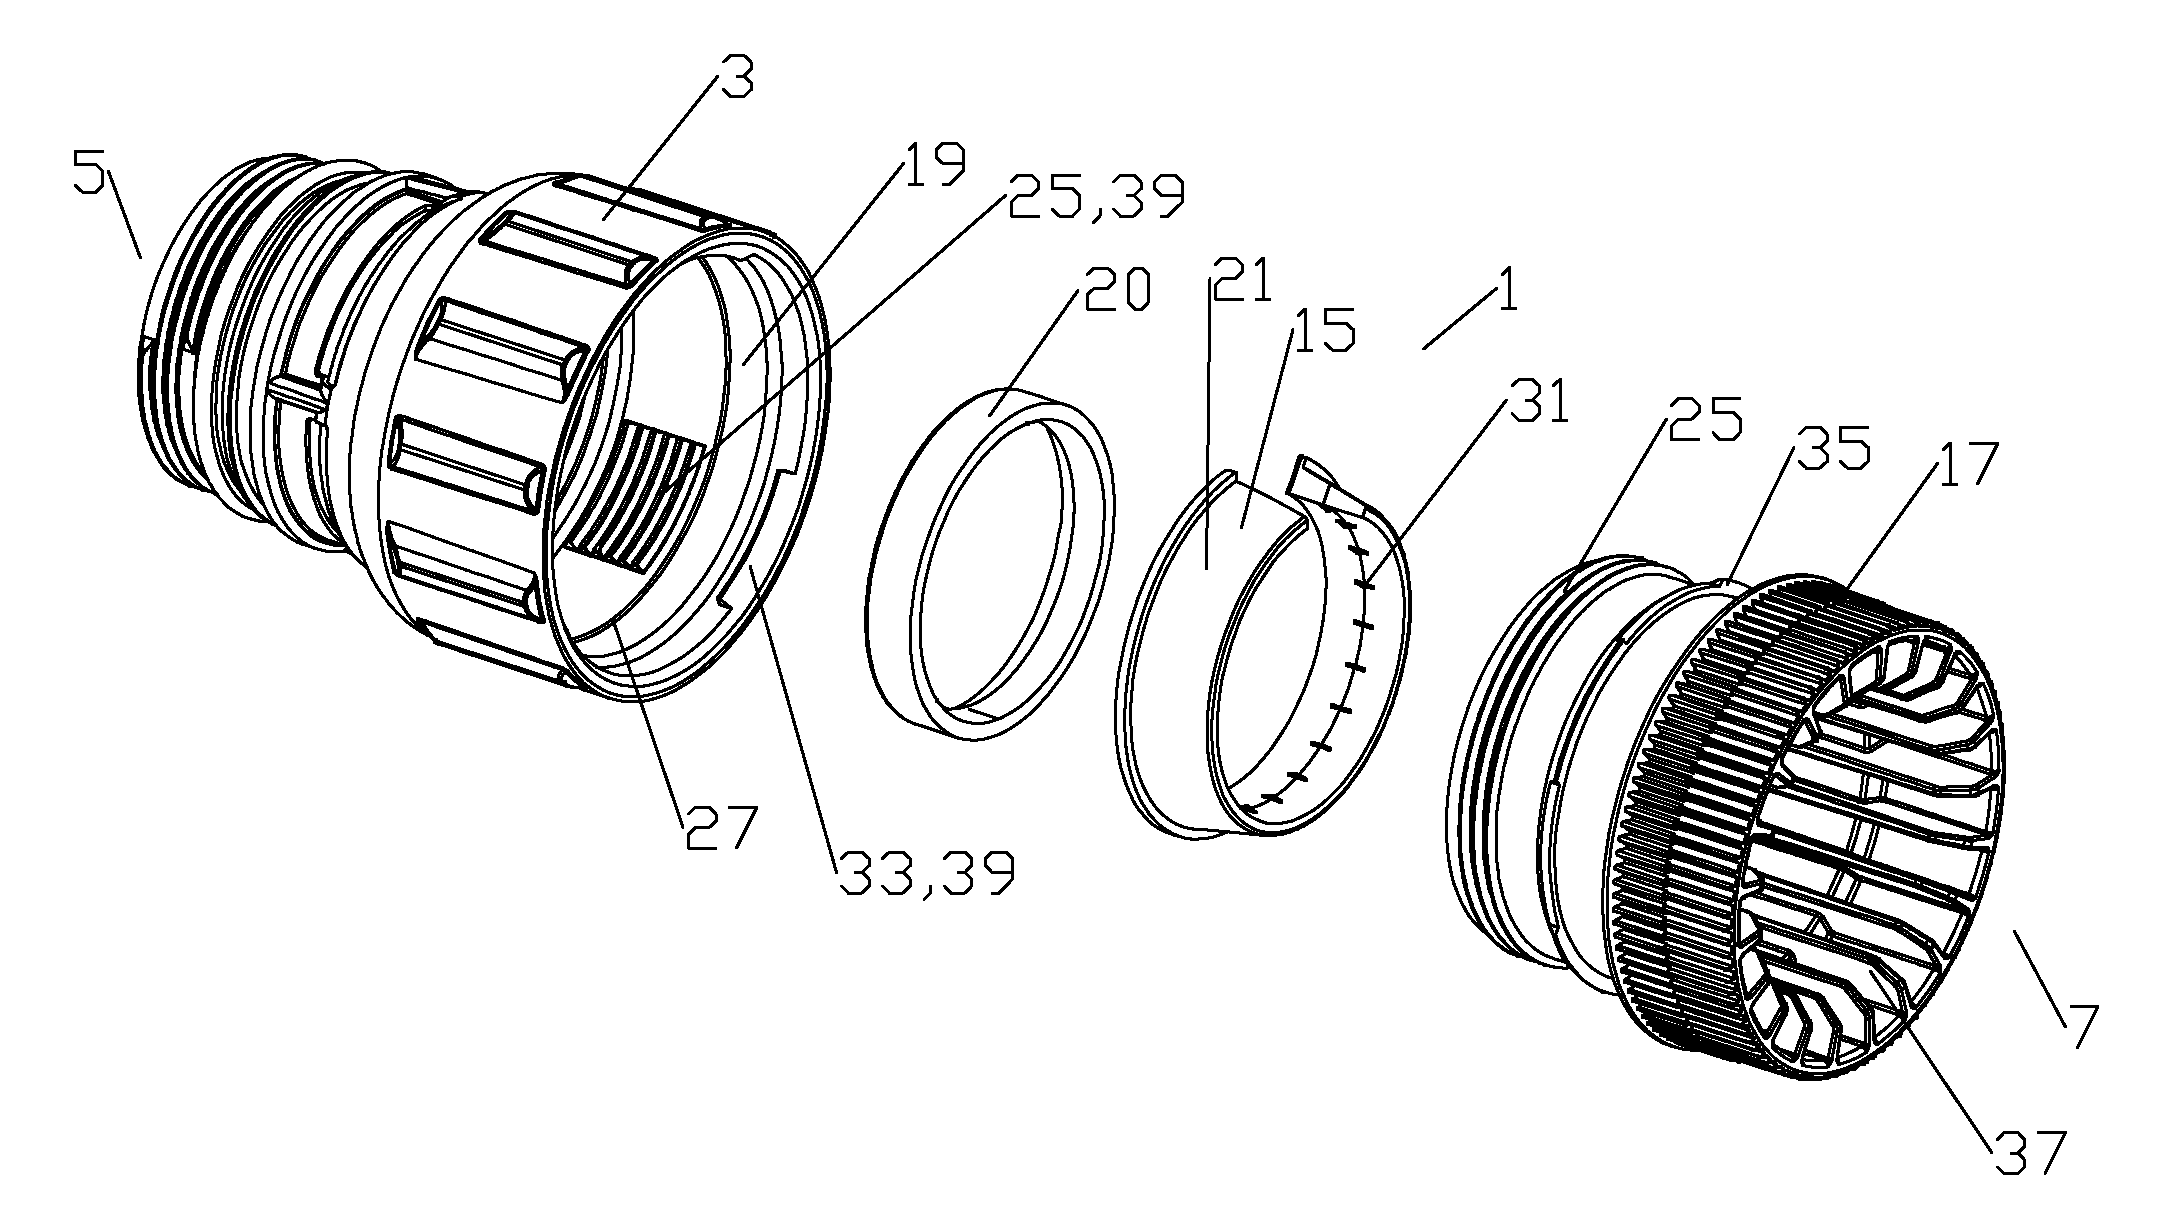 Connector stabilizing coupling body assembly